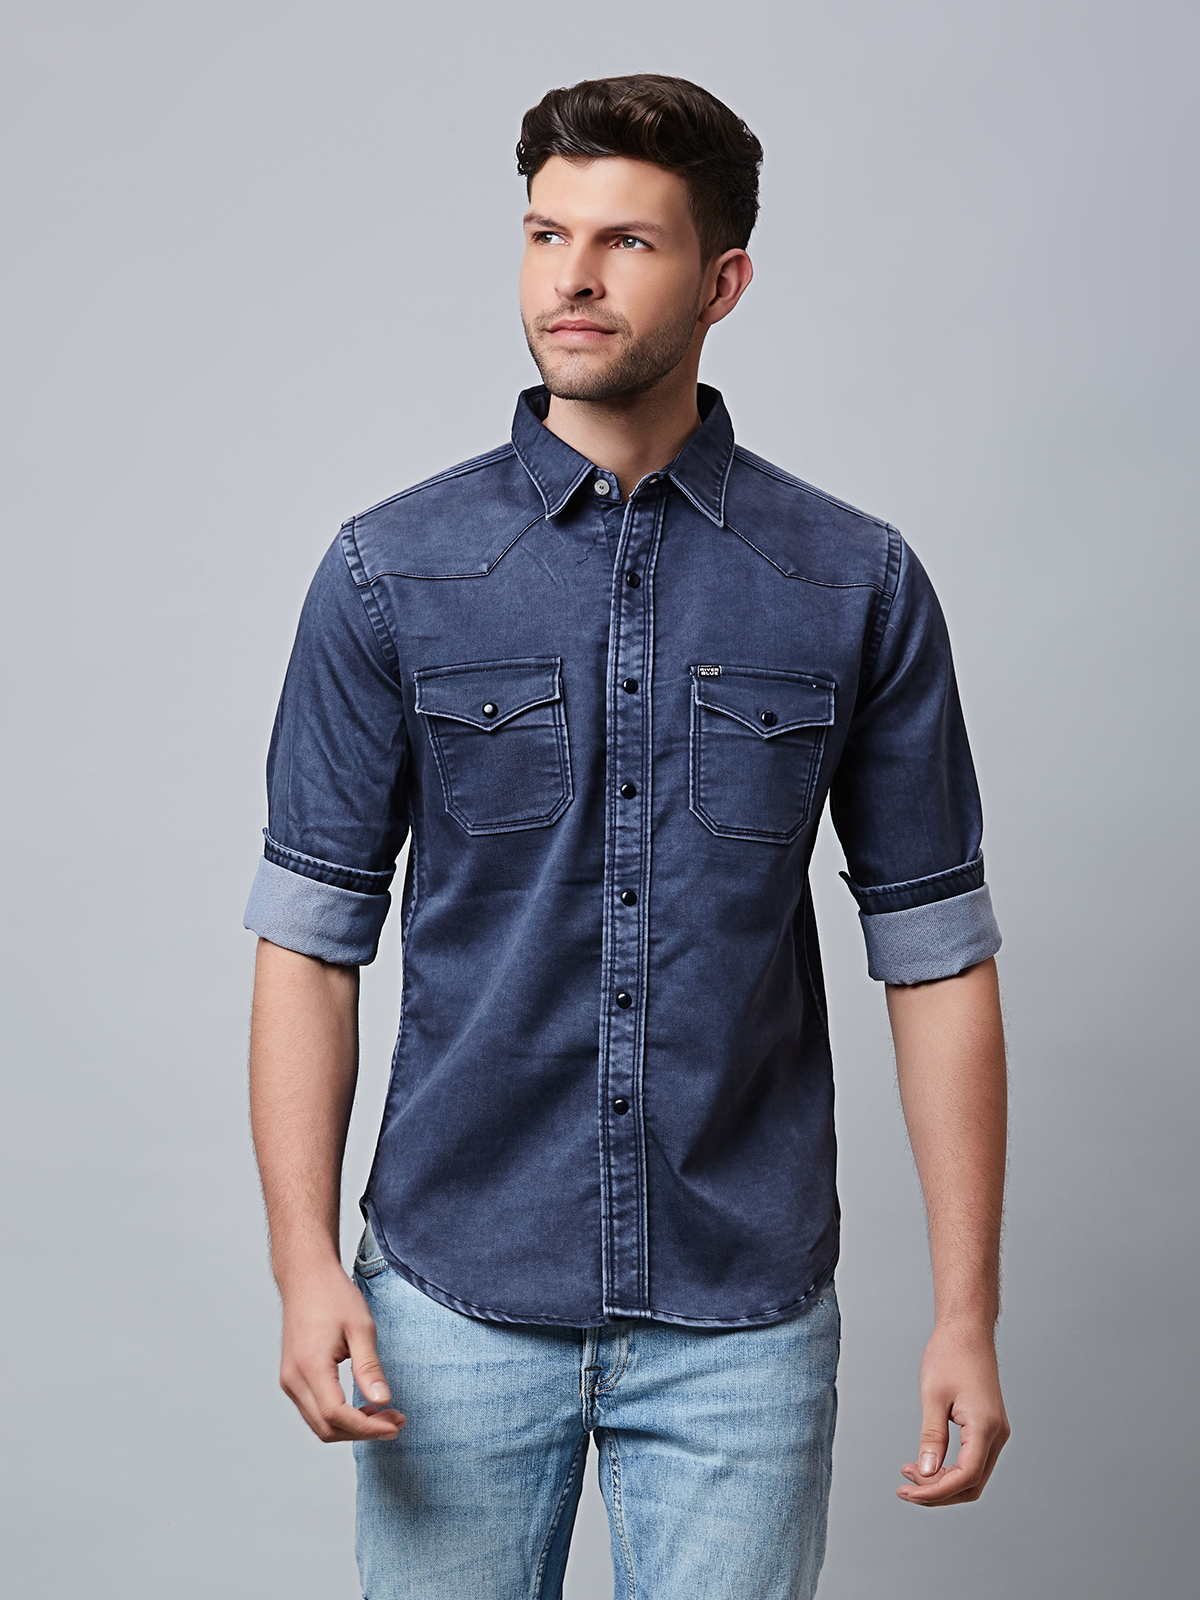 Buy Blue Shirts Online in India at Best Price - Westside – Page 3